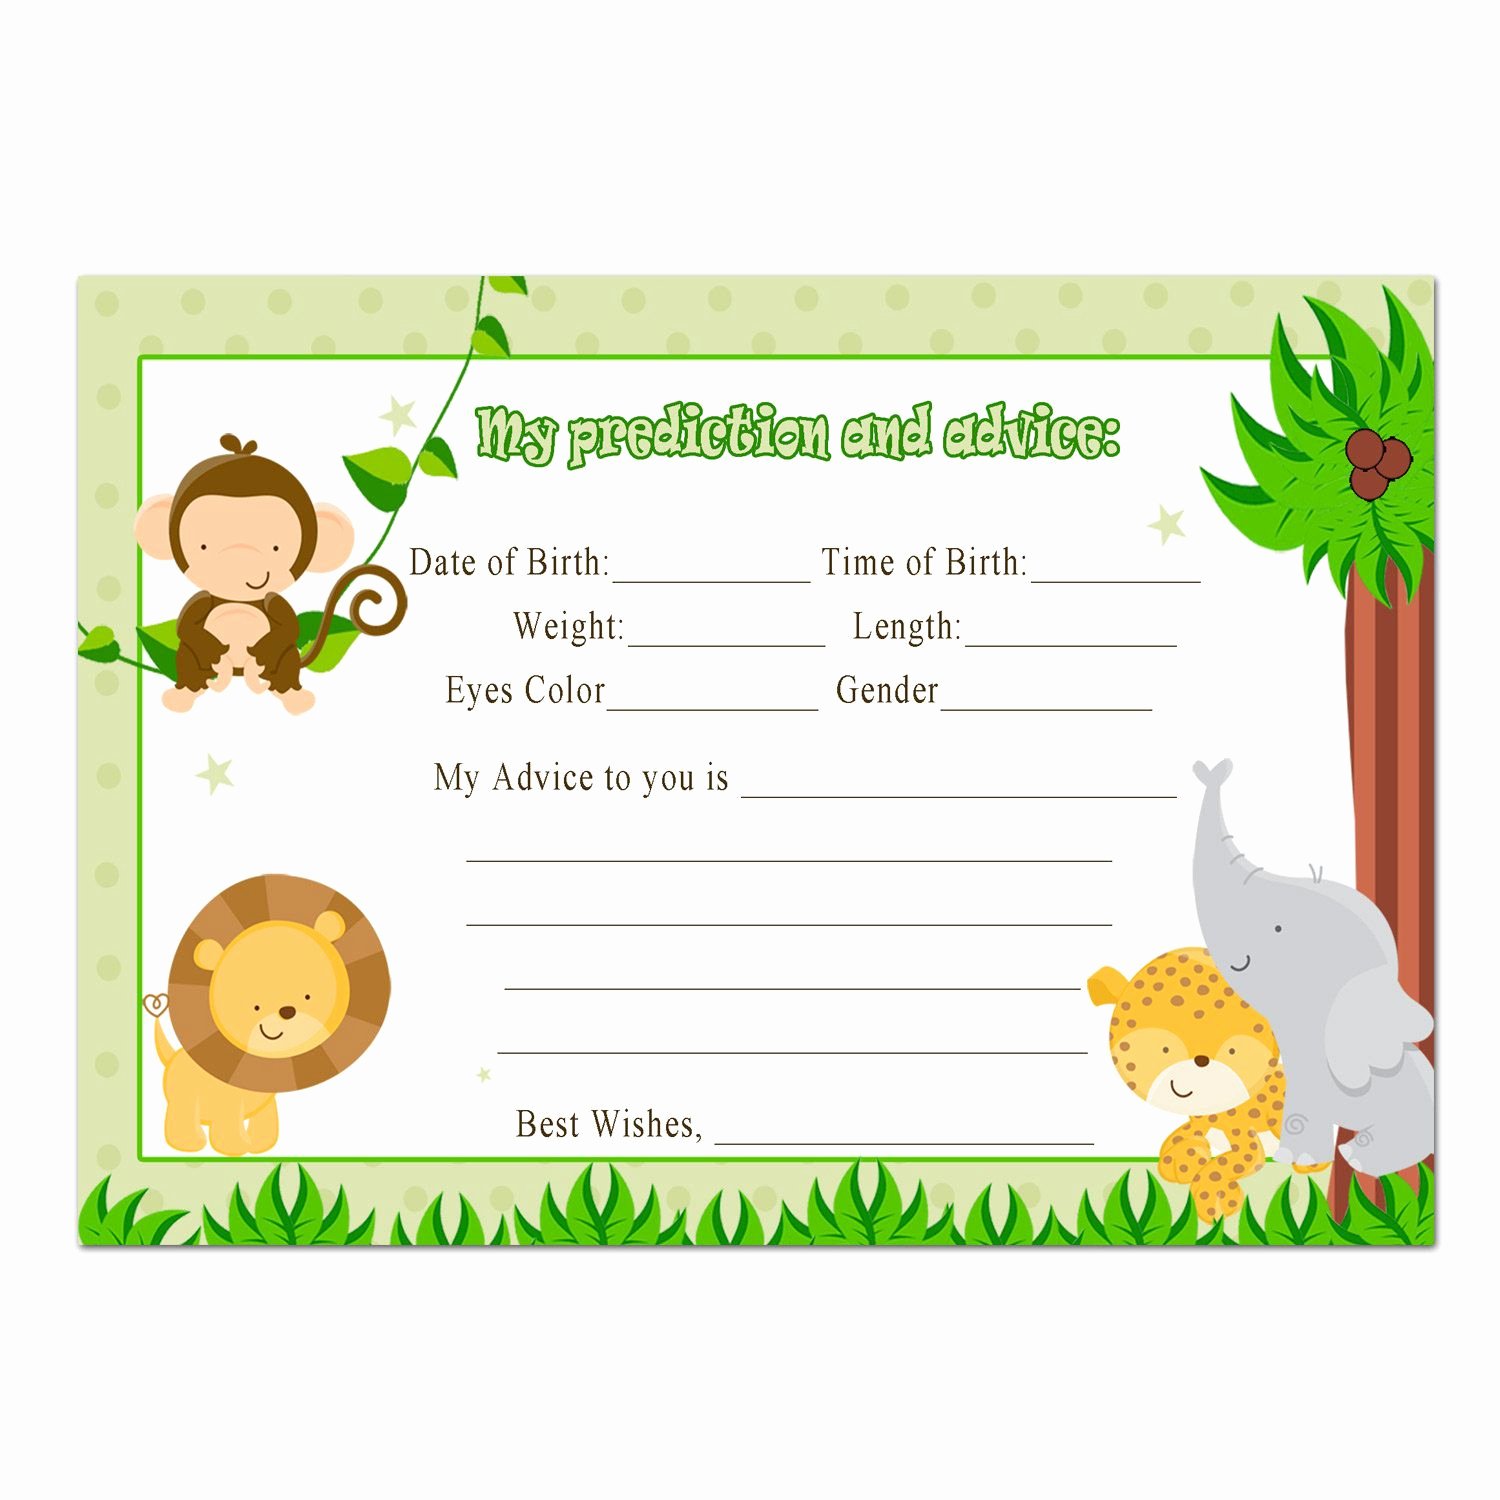 Baby Boy Invitation Template Awesome Graduation Party Free Baby Invitation Template Card